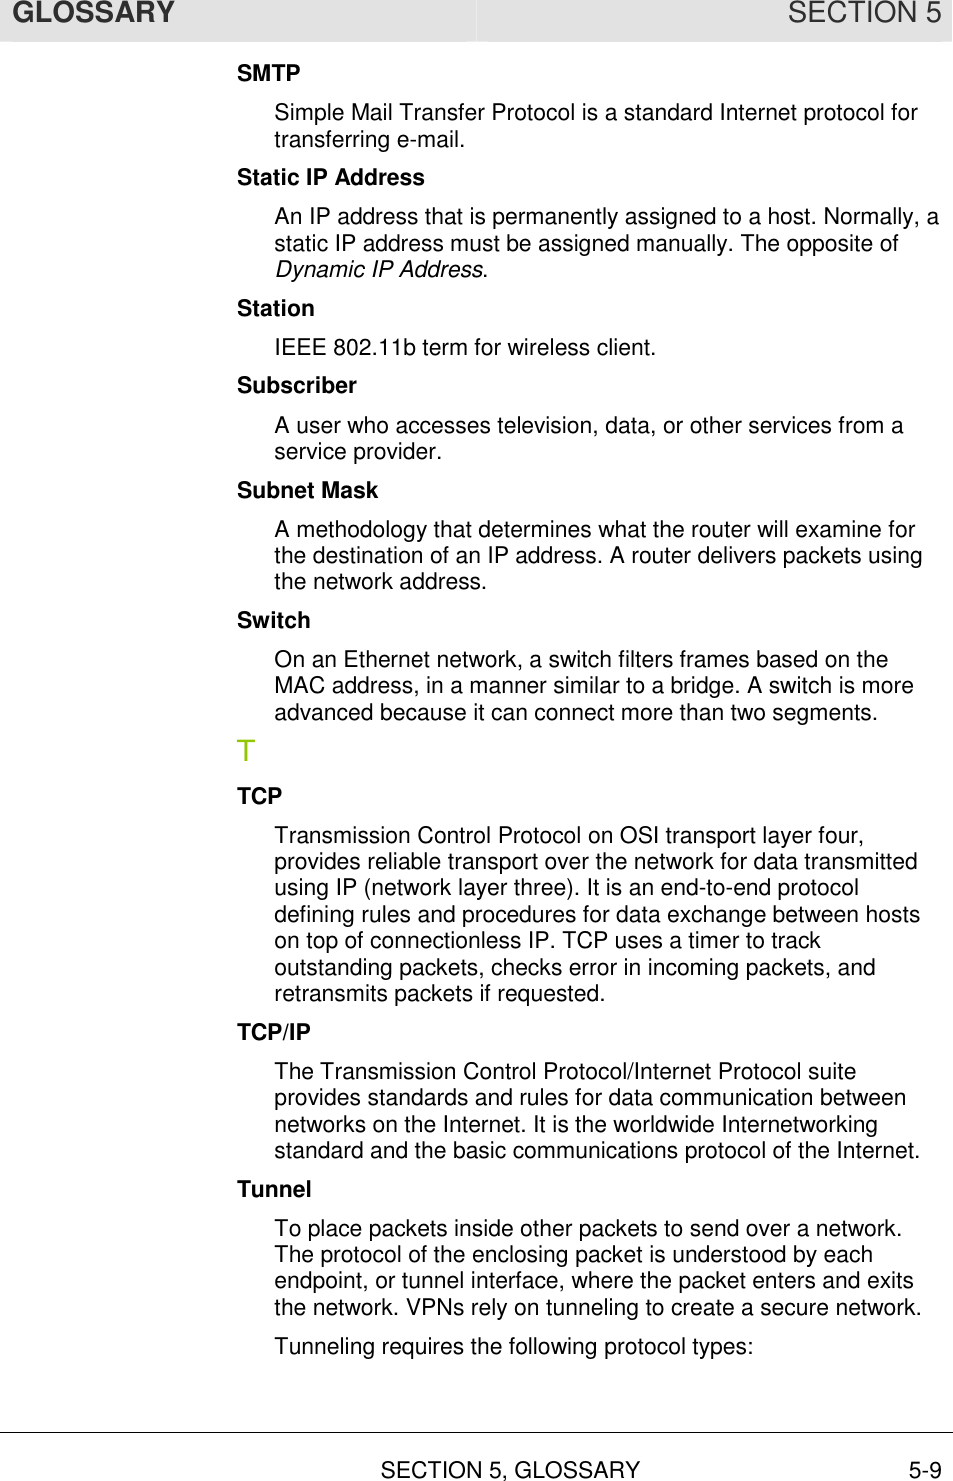 GLOSSARY SECTION 5  SECTION 5, GLOSSARY 5-9 SMTP Simple Mail Transfer Protocol is a standard Internet protocol for transferring e-mail. Static IP Address An IP address that is permanently assigned to a host. Normally, a static IP address must be assigned manually. The opposite of Dynamic IP Address. Station IEEE 802.11b term for wireless client. Subscriber A user who accesses television, data, or other services from a service provider. Subnet Mask A methodology that determines what the router will examine for the destination of an IP address. A router delivers packets using the network address. Switch On an Ethernet network, a switch filters frames based on the MAC address, in a manner similar to a bridge. A switch is more advanced because it can connect more than two segments. T TCP Transmission Control Protocol on OSI transport layer four, provides reliable transport over the network for data transmitted using IP (network layer three). It is an end-to-end protocol defining rules and procedures for data exchange between hosts on top of connectionless IP. TCP uses a timer to track outstanding packets, checks error in incoming packets, and retransmits packets if requested. TCP/IP The Transmission Control Protocol/Internet Protocol suite provides standards and rules for data communication between networks on the Internet. It is the worldwide Internetworking standard and the basic communications protocol of the Internet. Tunnel To place packets inside other packets to send over a network. The protocol of the enclosing packet is understood by each endpoint, or tunnel interface, where the packet enters and exits the network. VPNs rely on tunneling to create a secure network. Tunneling requires the following protocol types:  